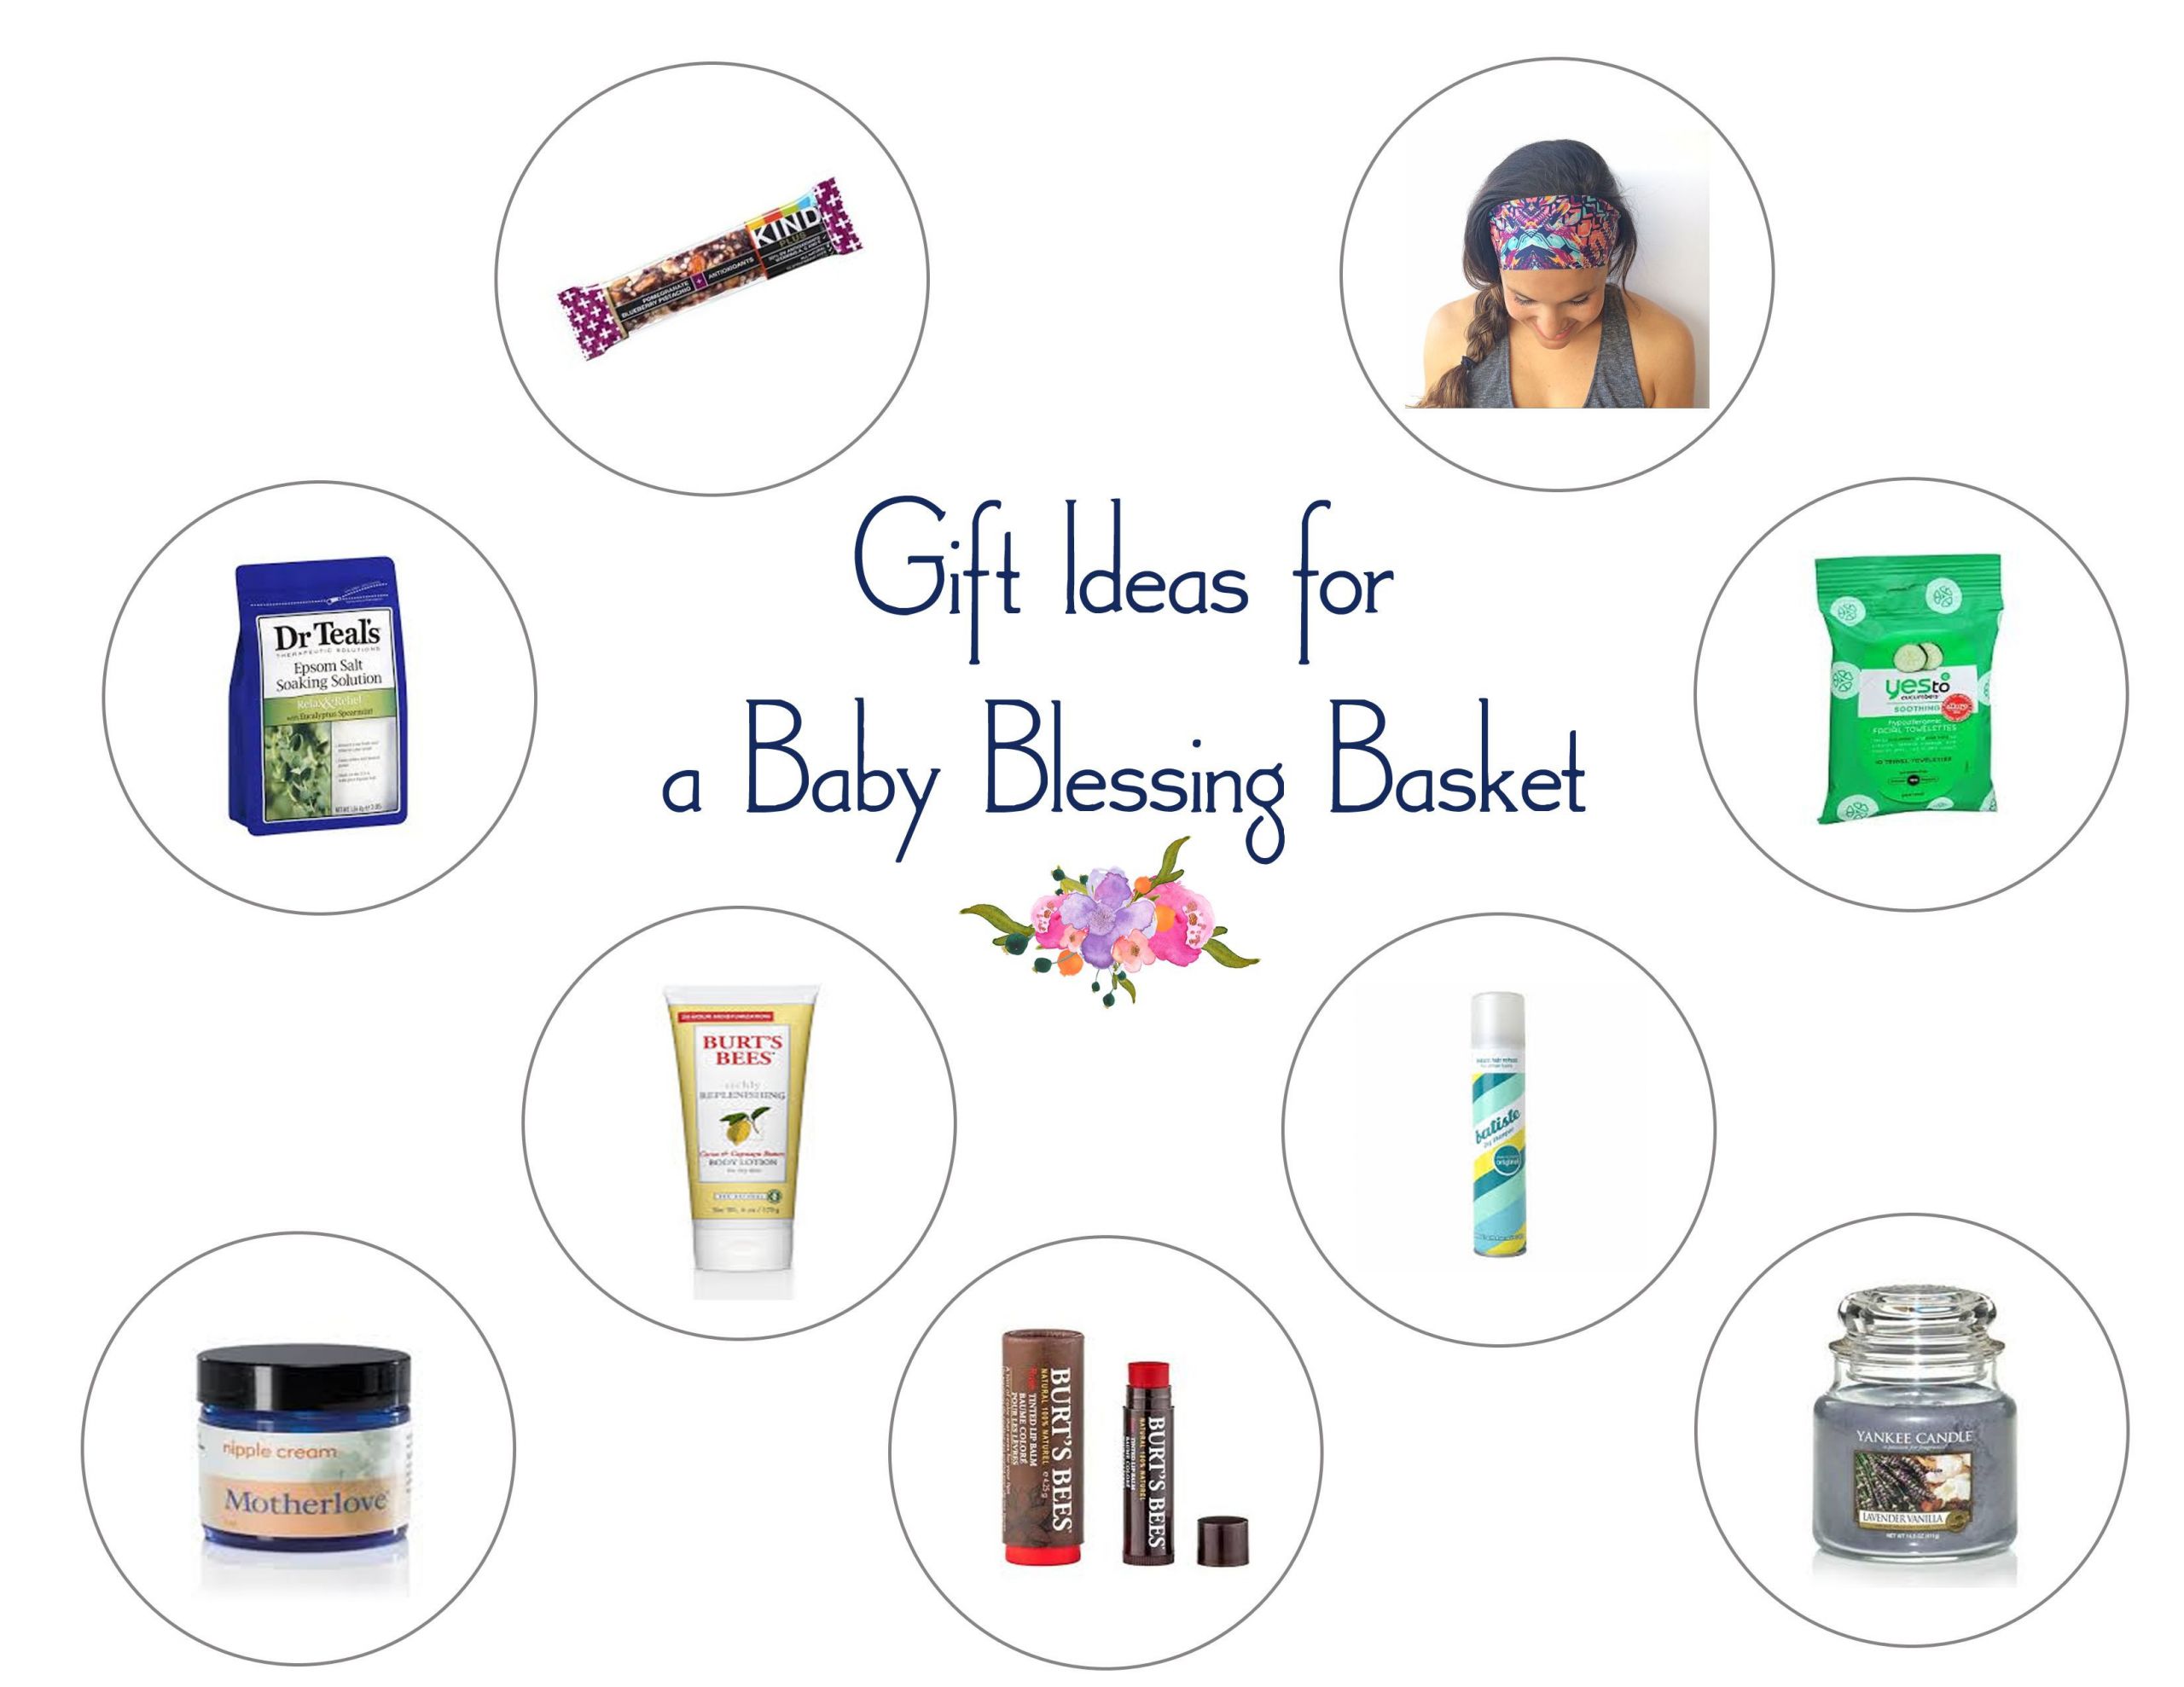 Baby Blessing Gift Ideas
 Gift Ideas for a Baby Blessing Basket